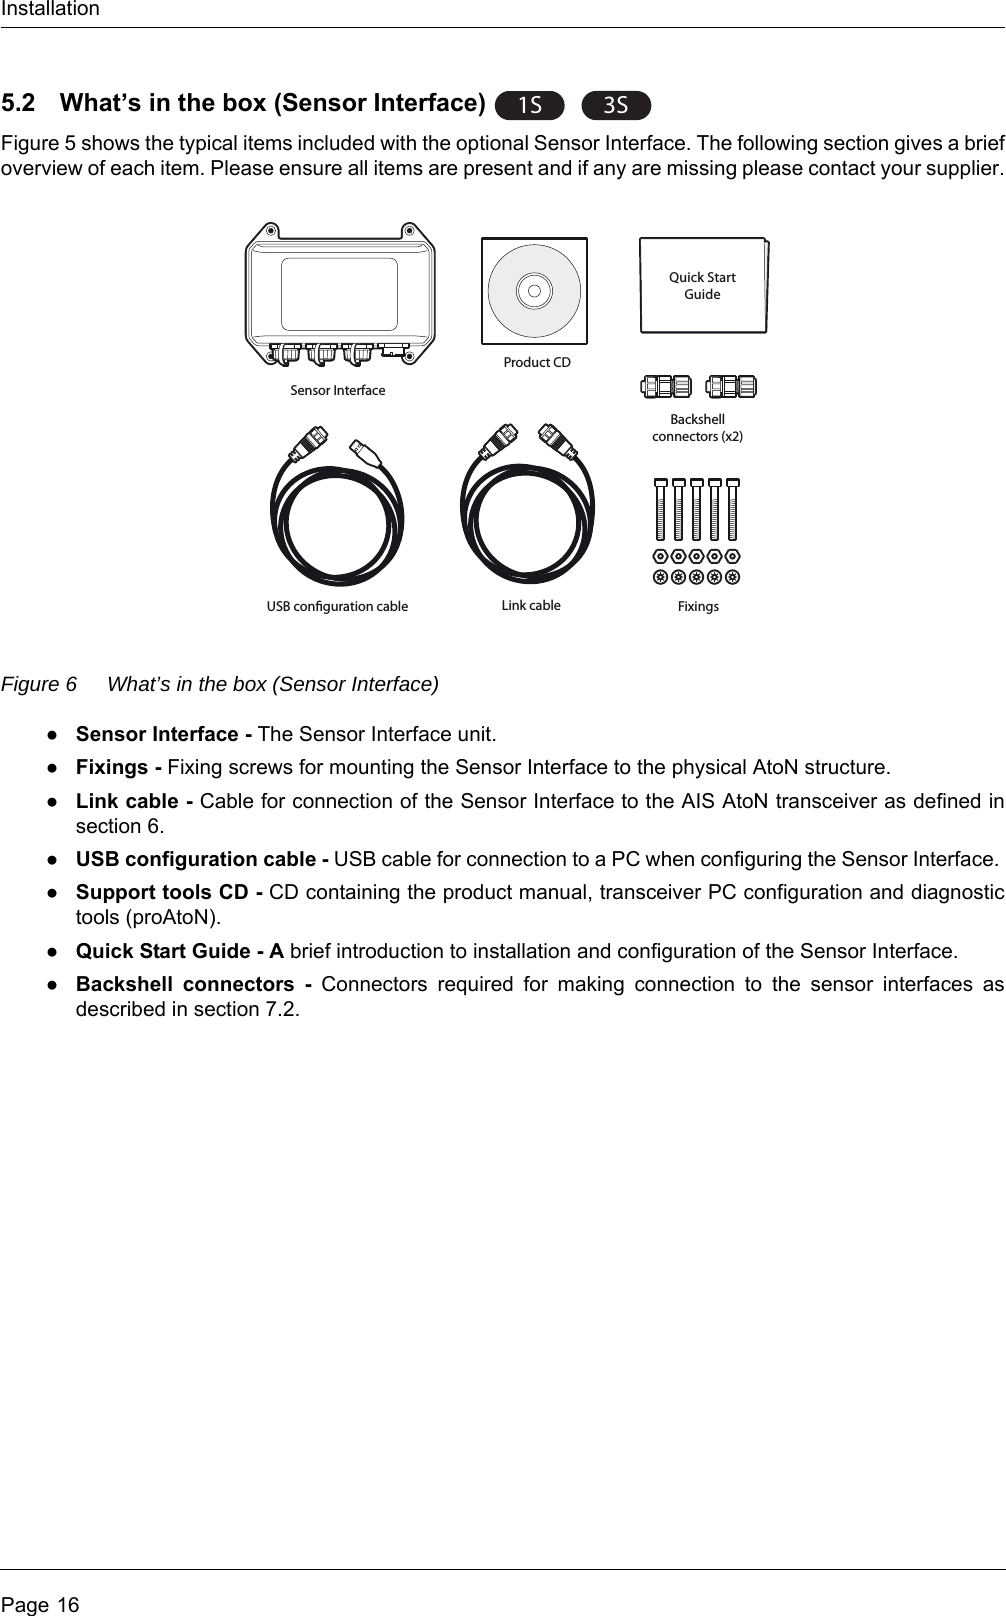 InstallationPage 165.2 What’s in the box (Sensor Interface) Figure 5 shows the typical items included with the optional Sensor Interface. The following section gives a brief overview of each item. Please ensure all items are present and if any are missing please contact your supplier.Figure 6 What’s in the box (Sensor Interface)●Sensor Interface - The Sensor Interface unit. ●Fixings - Fixing screws for mounting the Sensor Interface to the physical AtoN structure. ●Link cable - Cable for connection of the Sensor Interface to the AIS AtoN transceiver as defined in section 6. ●USB configuration cable - USB cable for connection to a PC when configuring the Sensor Interface. ●Support tools CD - CD containing the product manual, transceiver PC configuration and diagnostic tools (proAtoN). ●Quick Start Guide - A brief introduction to installation and configuration of the Sensor Interface. ●Backshell connectors - Connectors required for making connection to the sensor interfaces as described in section 7.2. 1S3SQuick StartGuideSensor InterfaceProduct CDLink cable FixingsBackshellconnectors (x2)USB conguration cable